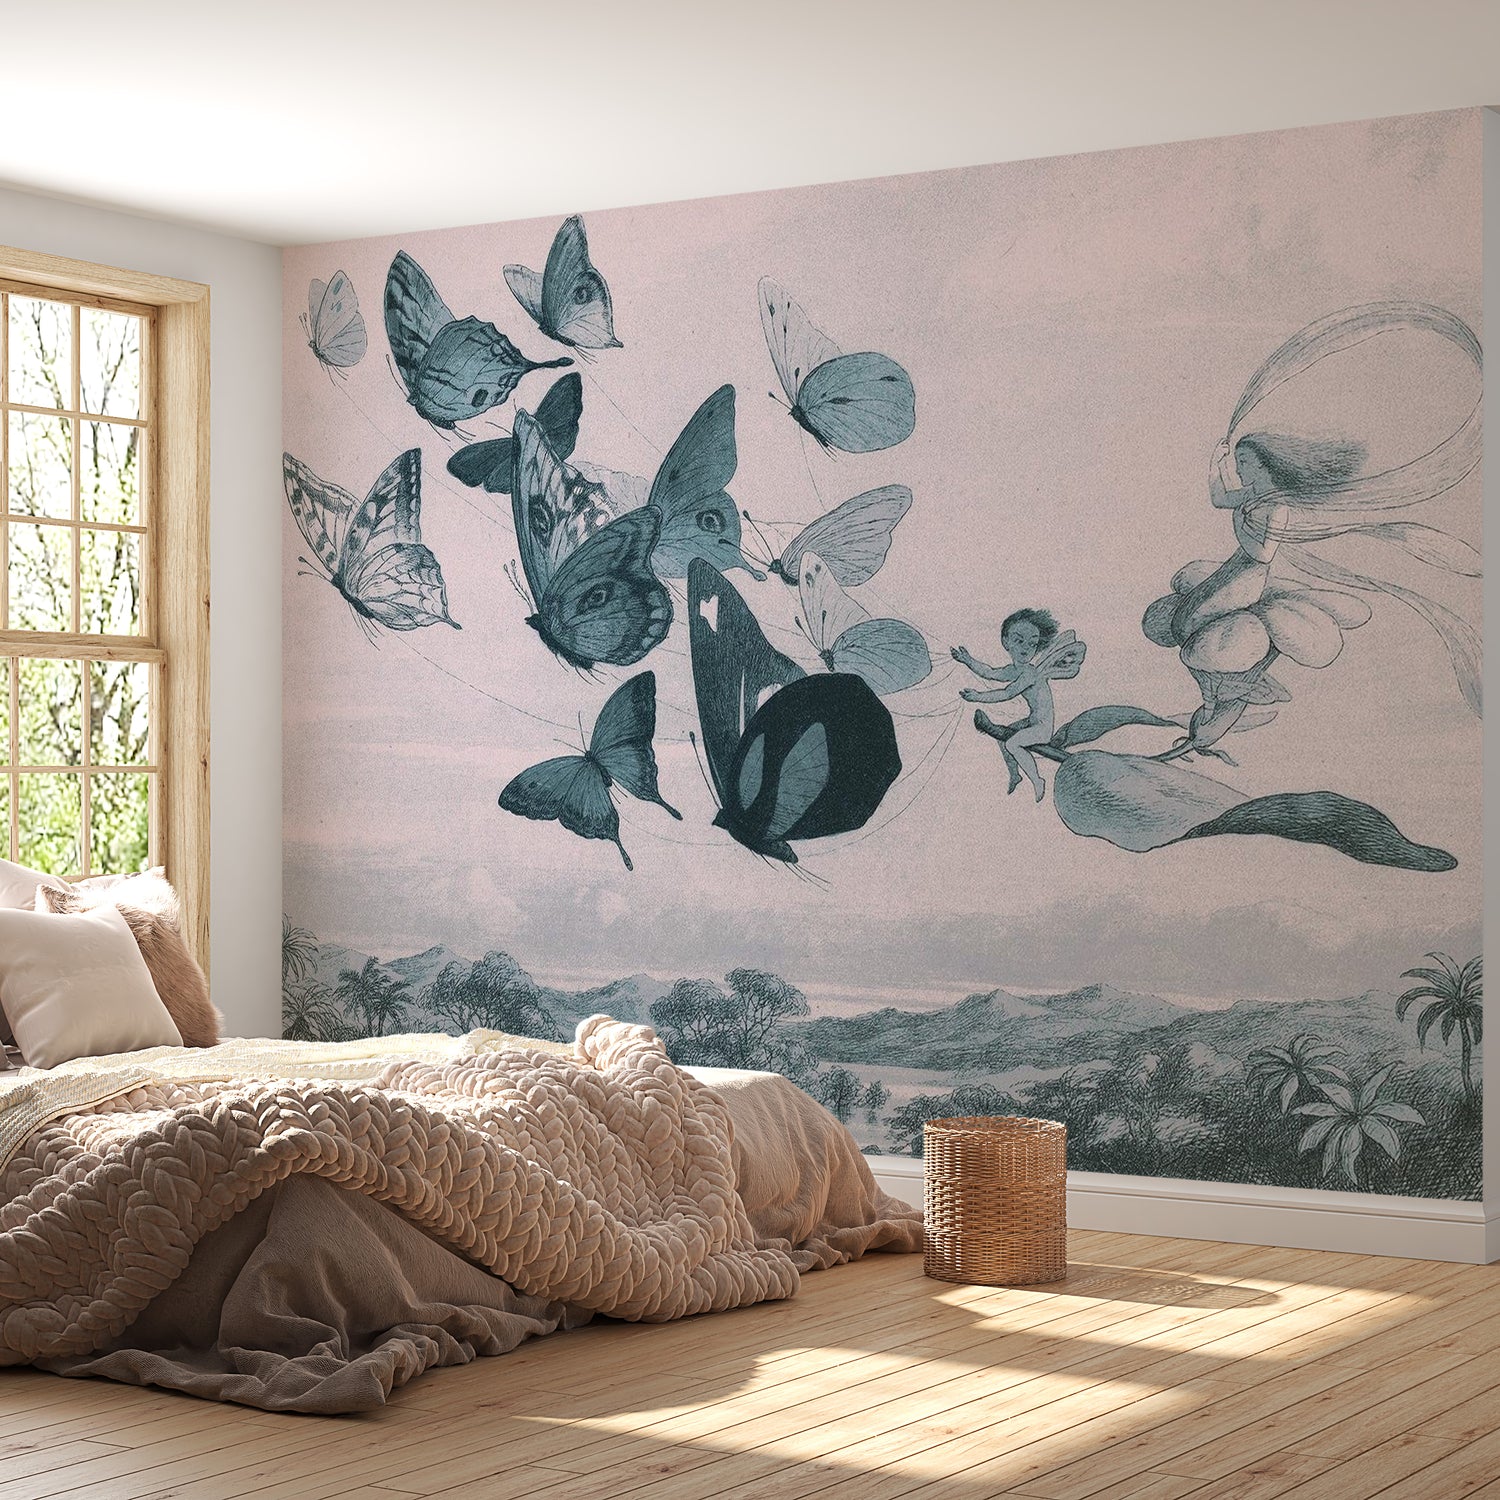 Peel & Stick Fantasy Wall Mural - Butterflies And Fairy - Removable Wall Decals